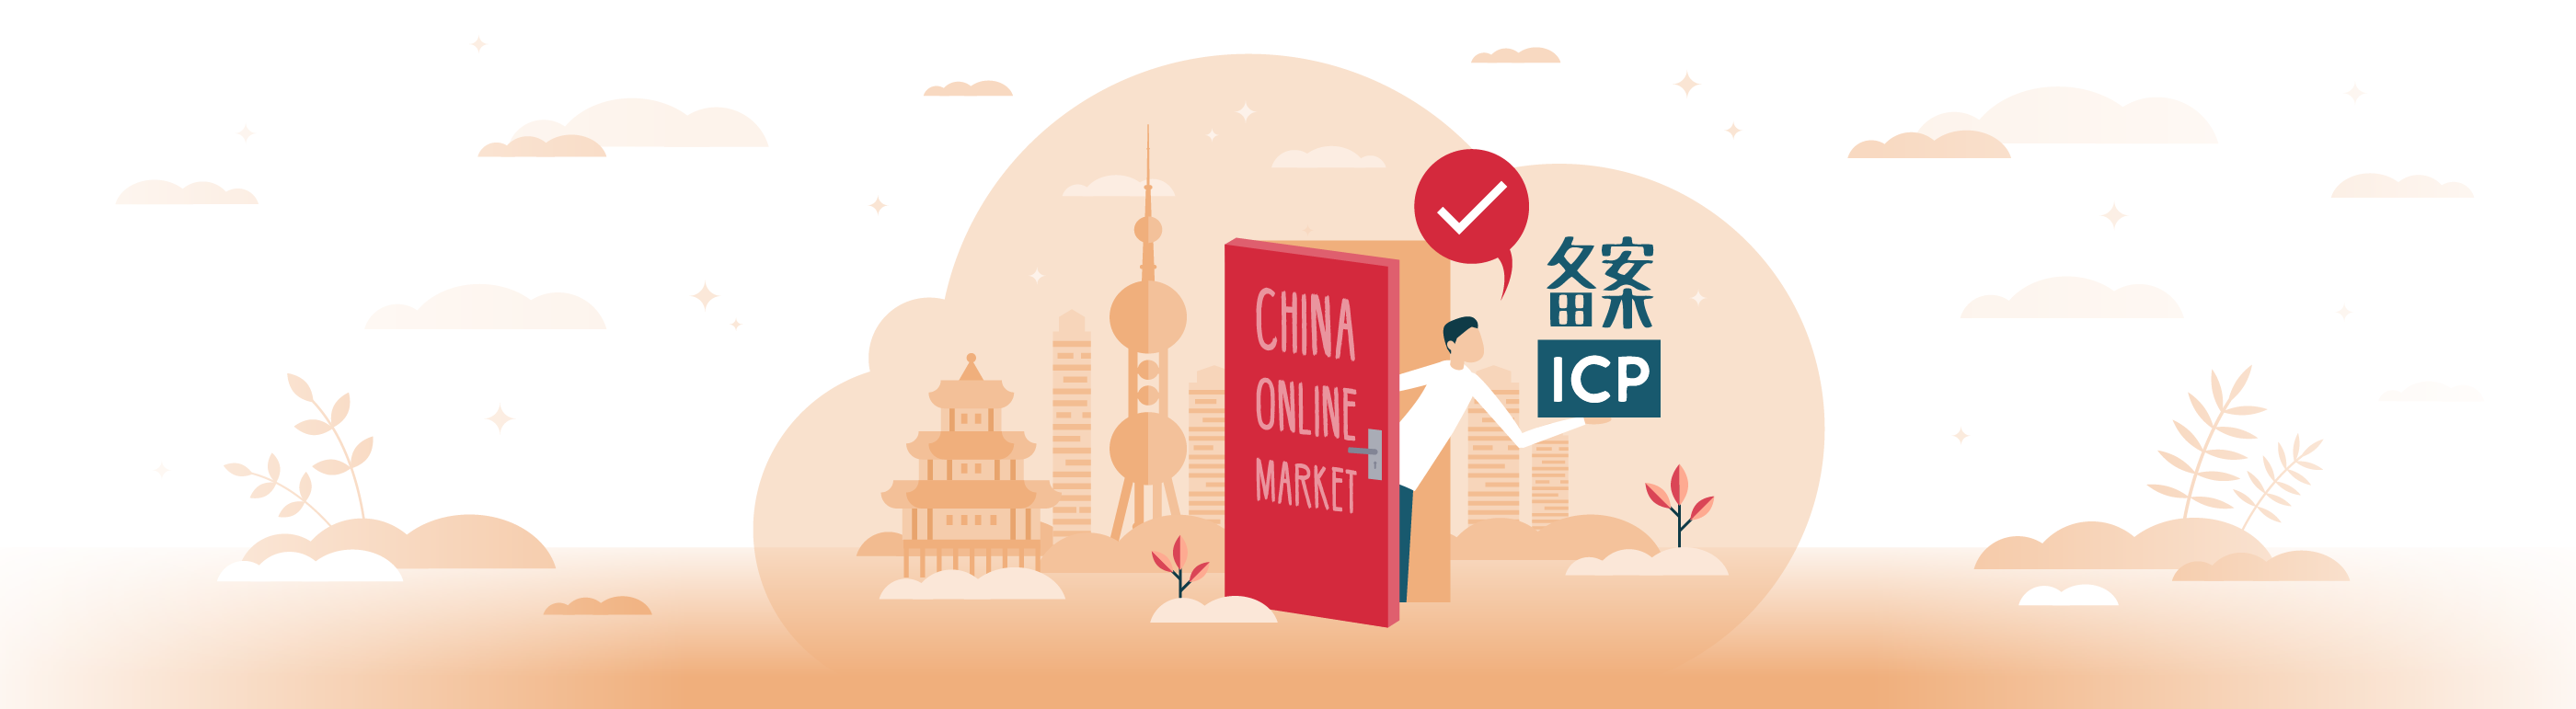 ICP License for Chinese Websites: All you Need to Know